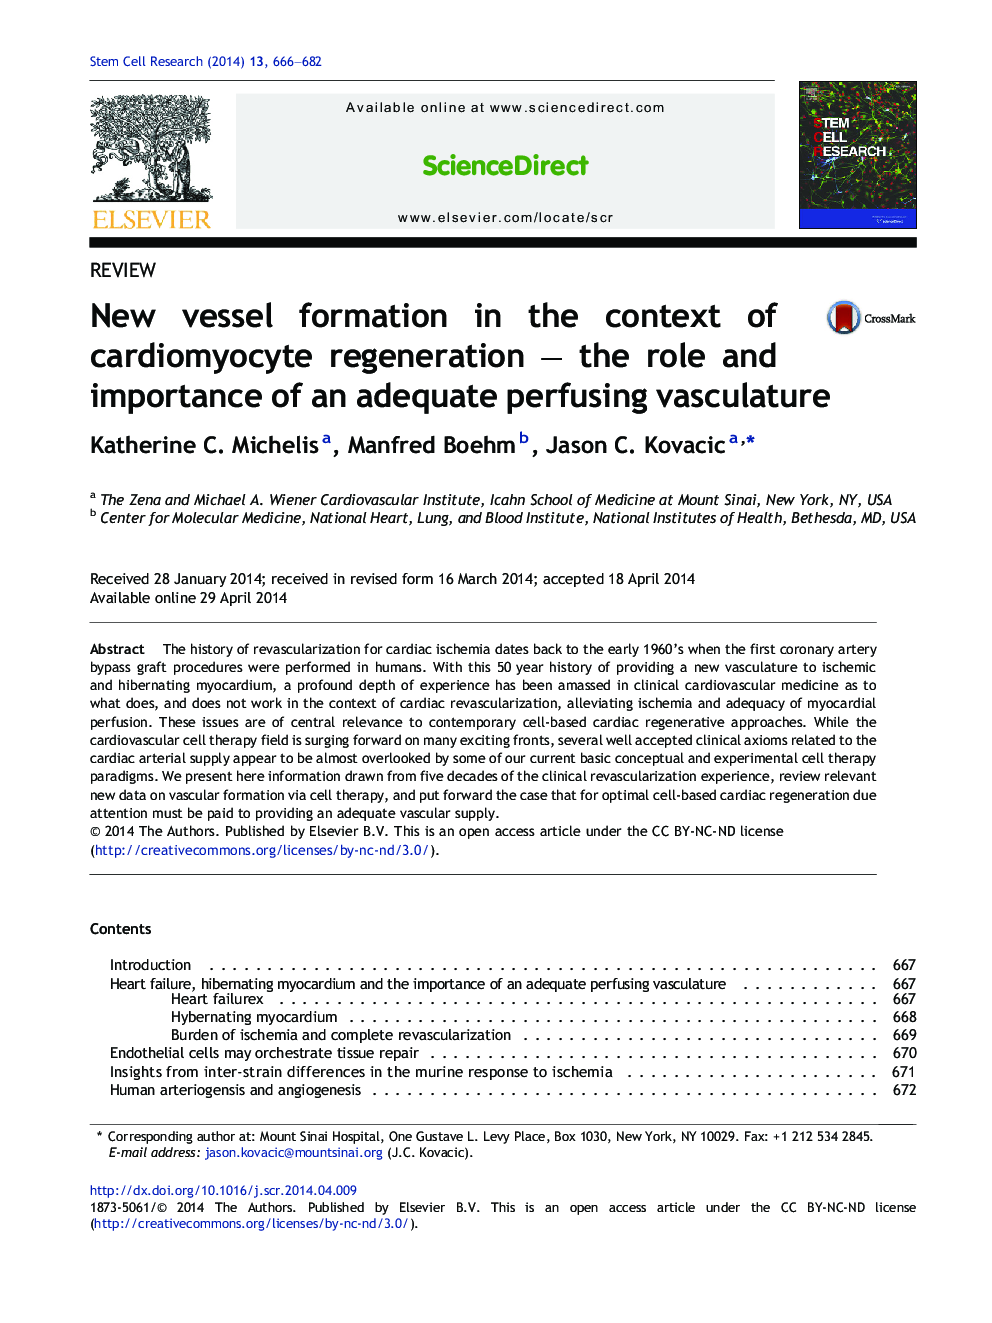 New vessel formation in the context of cardiomyocyte regeneration – the role and importance of an adequate perfusing vasculature